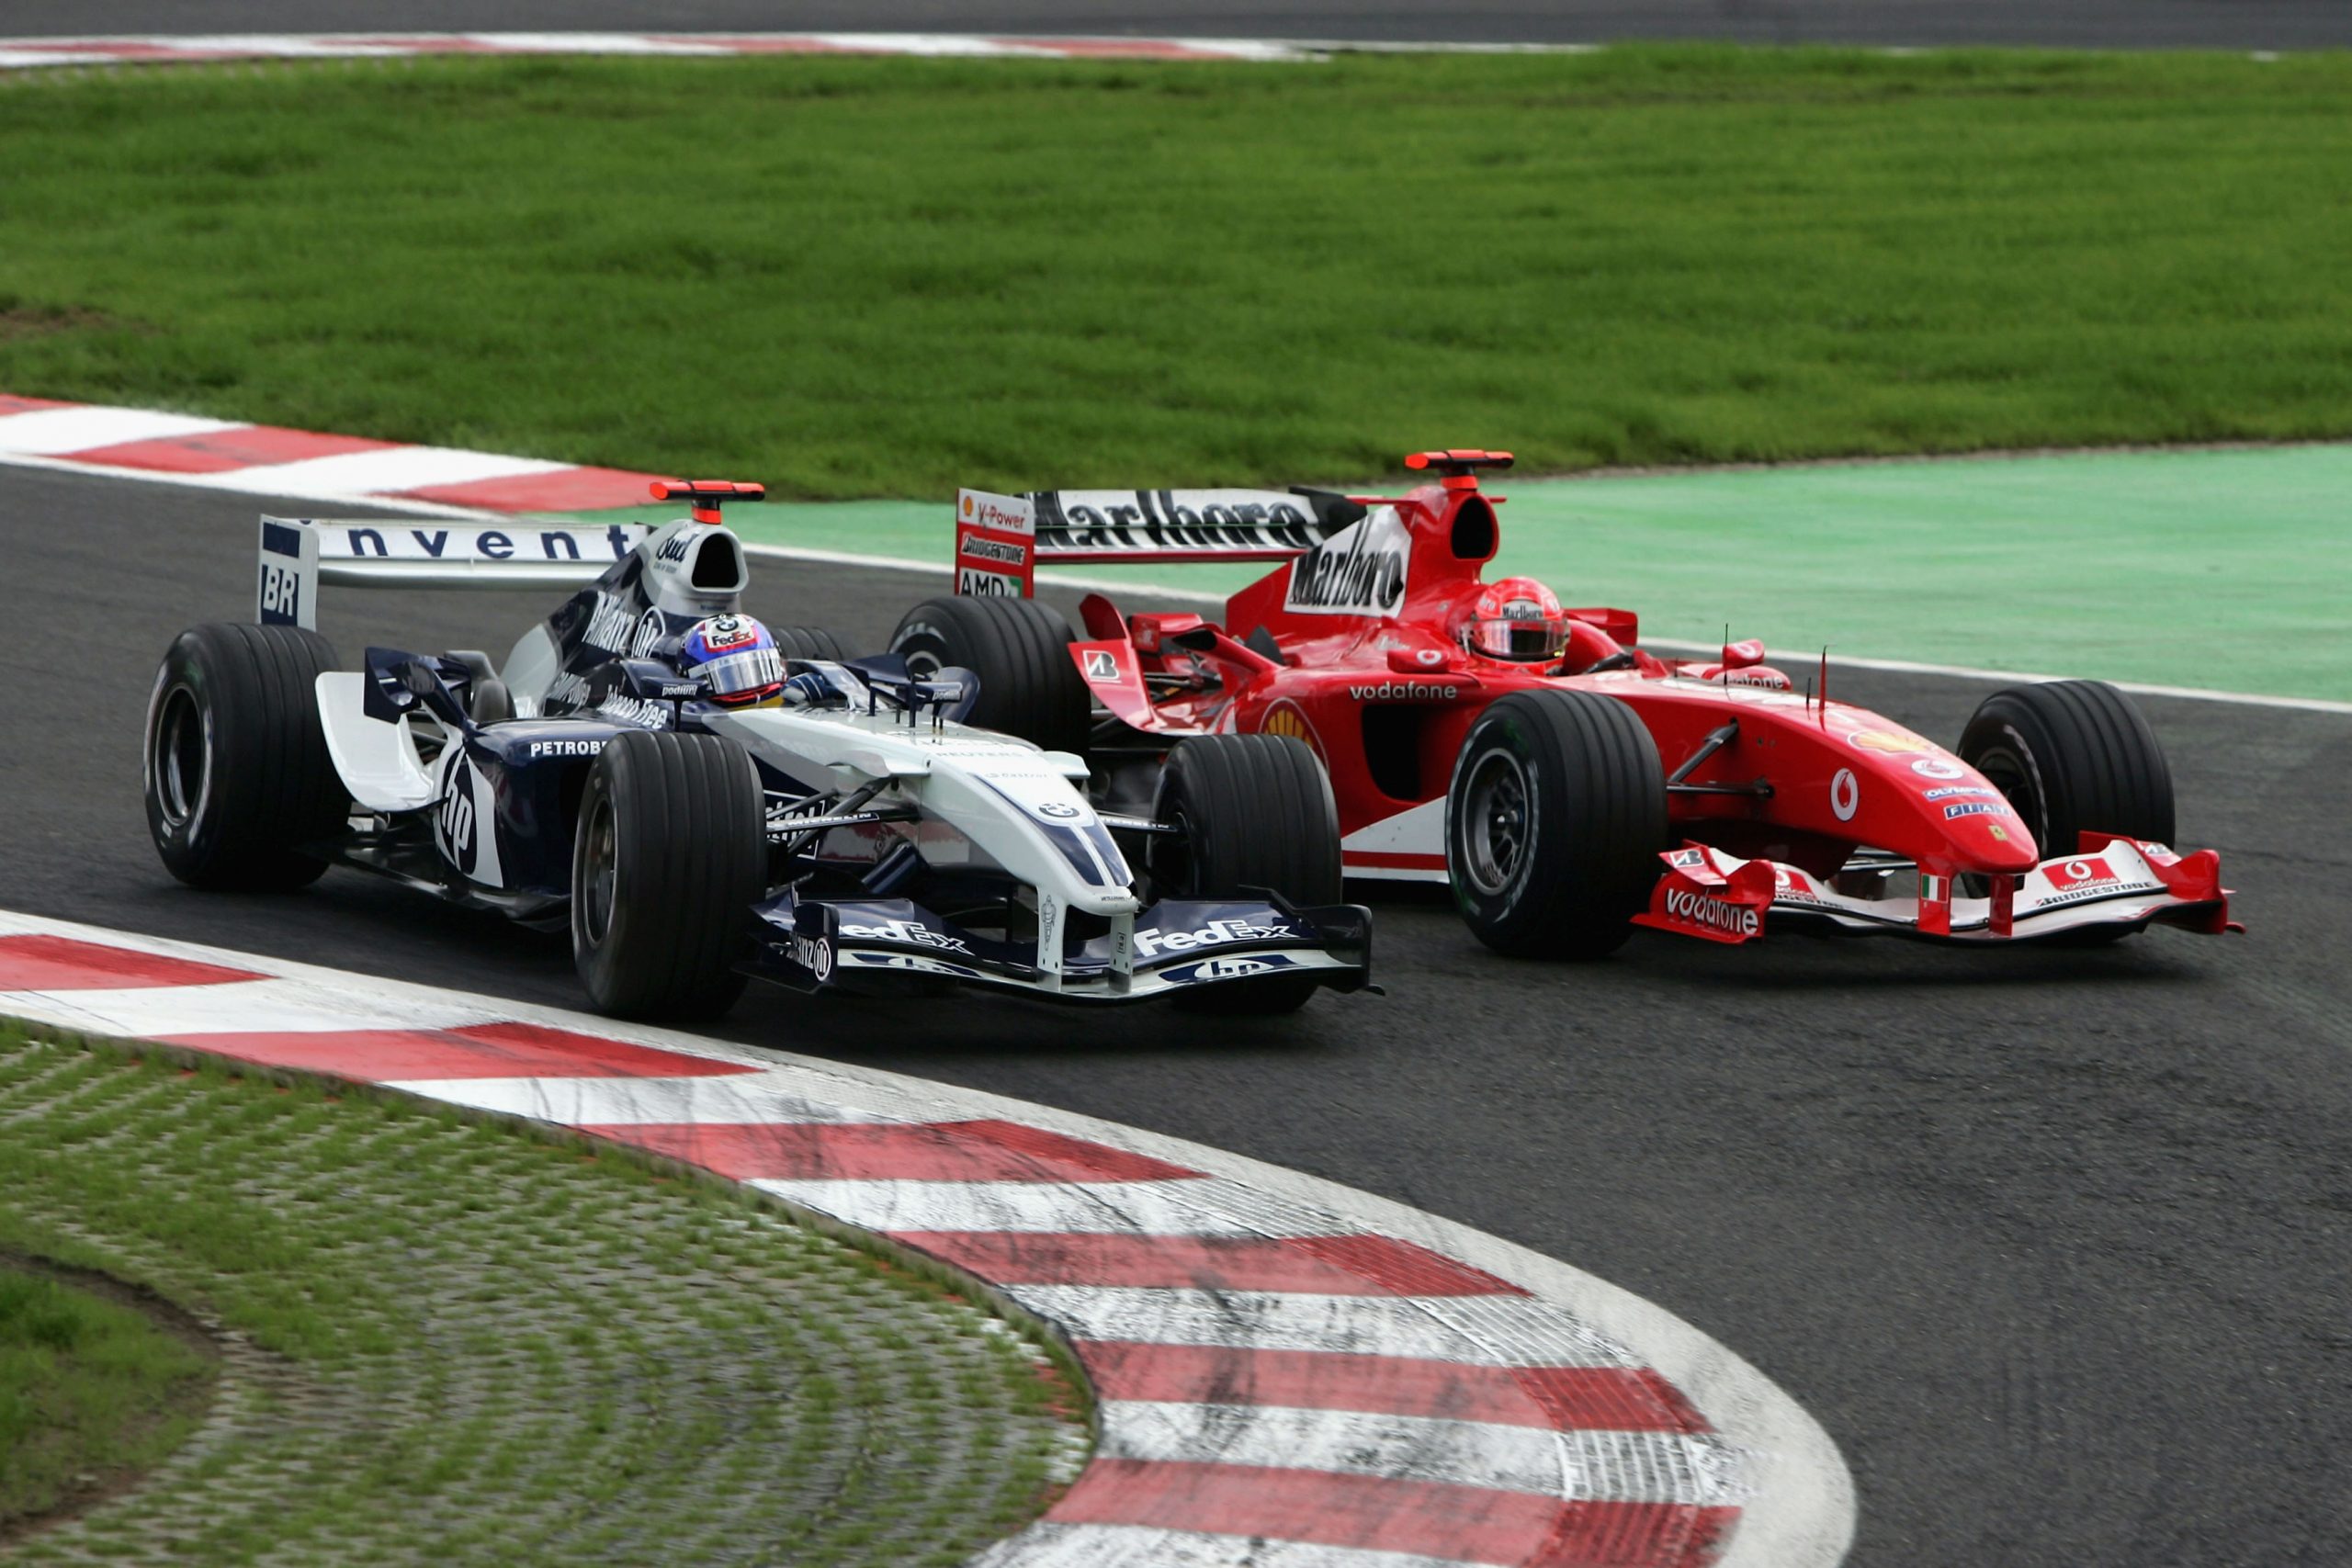 Juan Pablo Montoya Gets to Drive the Formula 1 Car He Spent His Career Trying to Beat